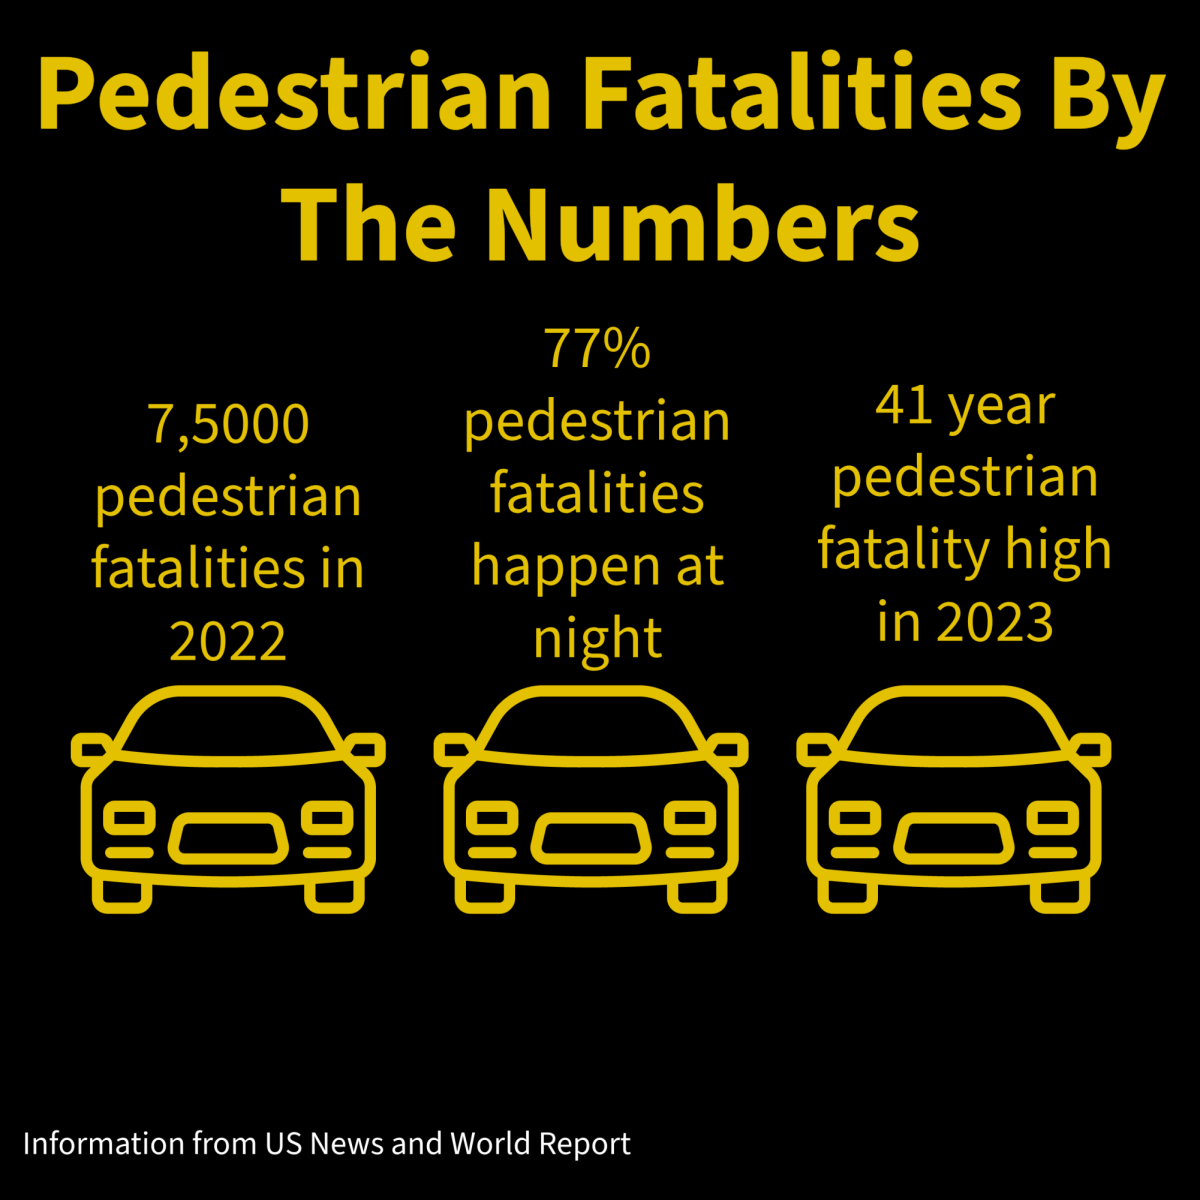 Statistics+show+that+in+recent+years+rates+of+pedestrian+fatalities+have+risen+exponentially.+